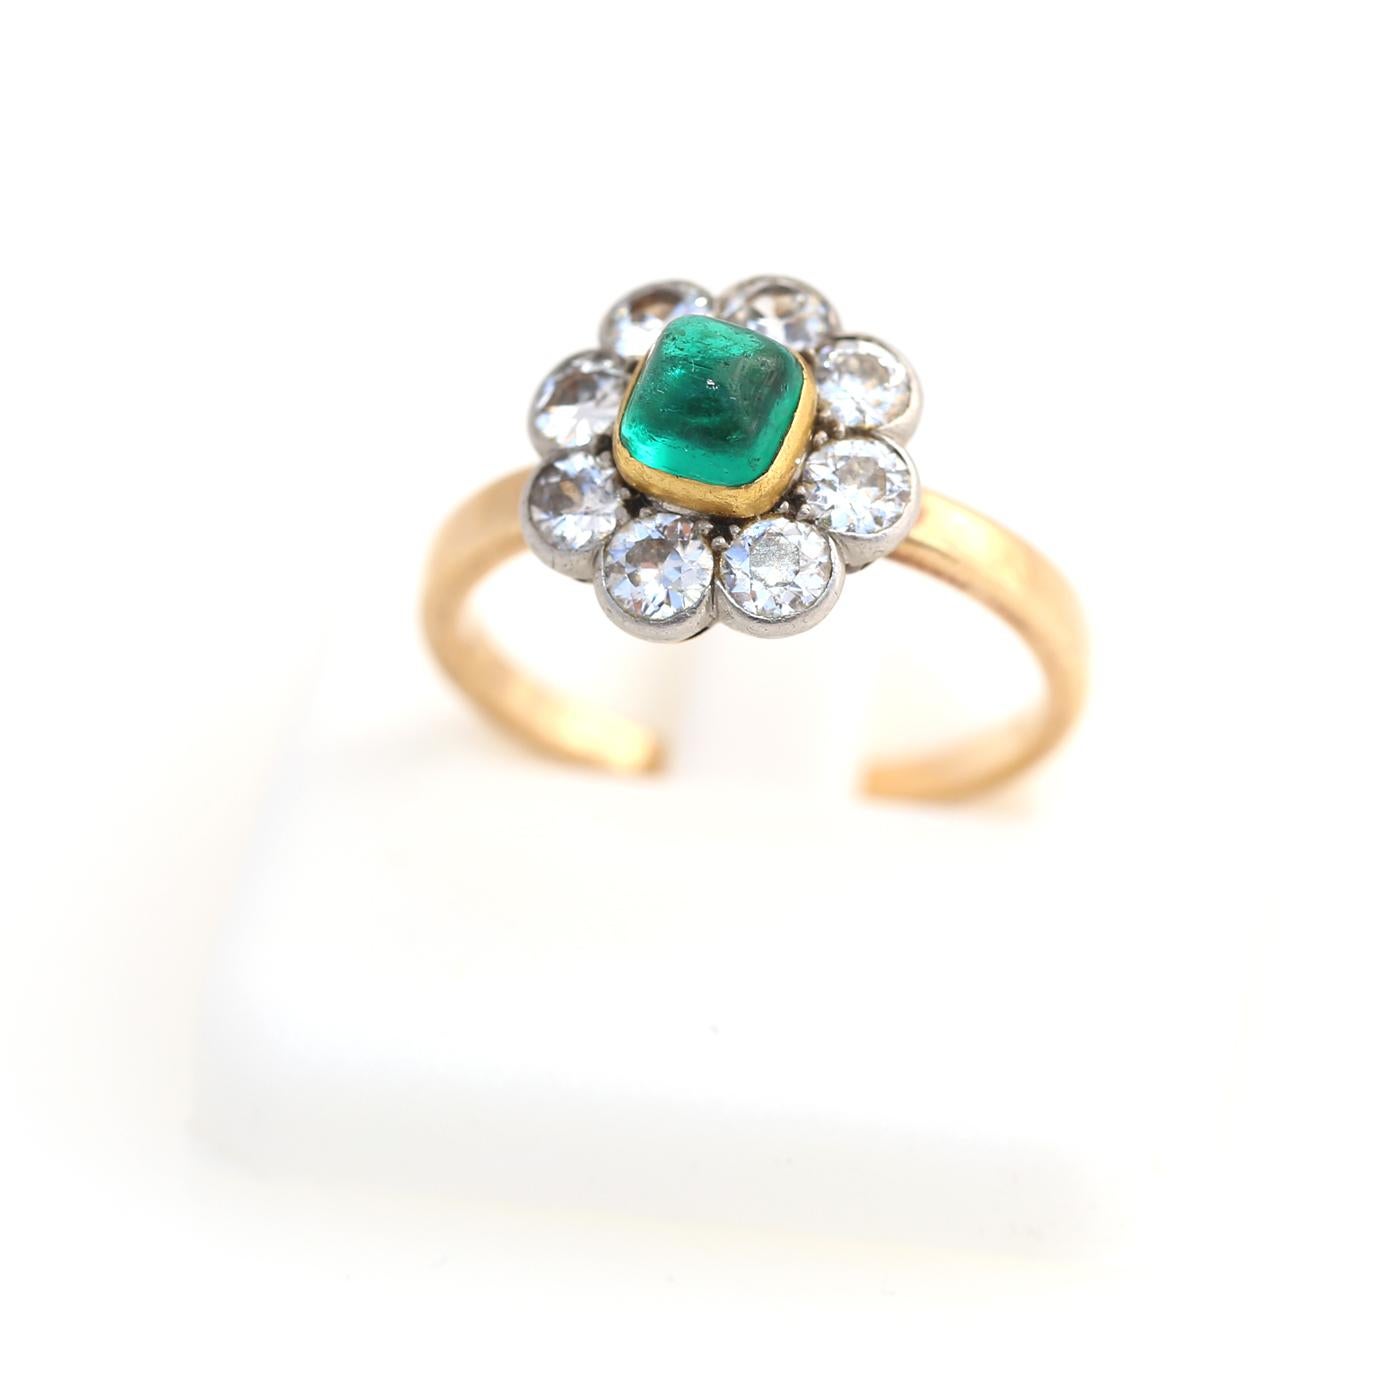 Emerald Diamonds Ring Victorian in Original Box.
This stunning ring from the 1890s features an entirely natural Colombian Emerald of vivid green colour that weighs in at almost a full carat. Surrounded like a flower with 8 round-cut old-mine